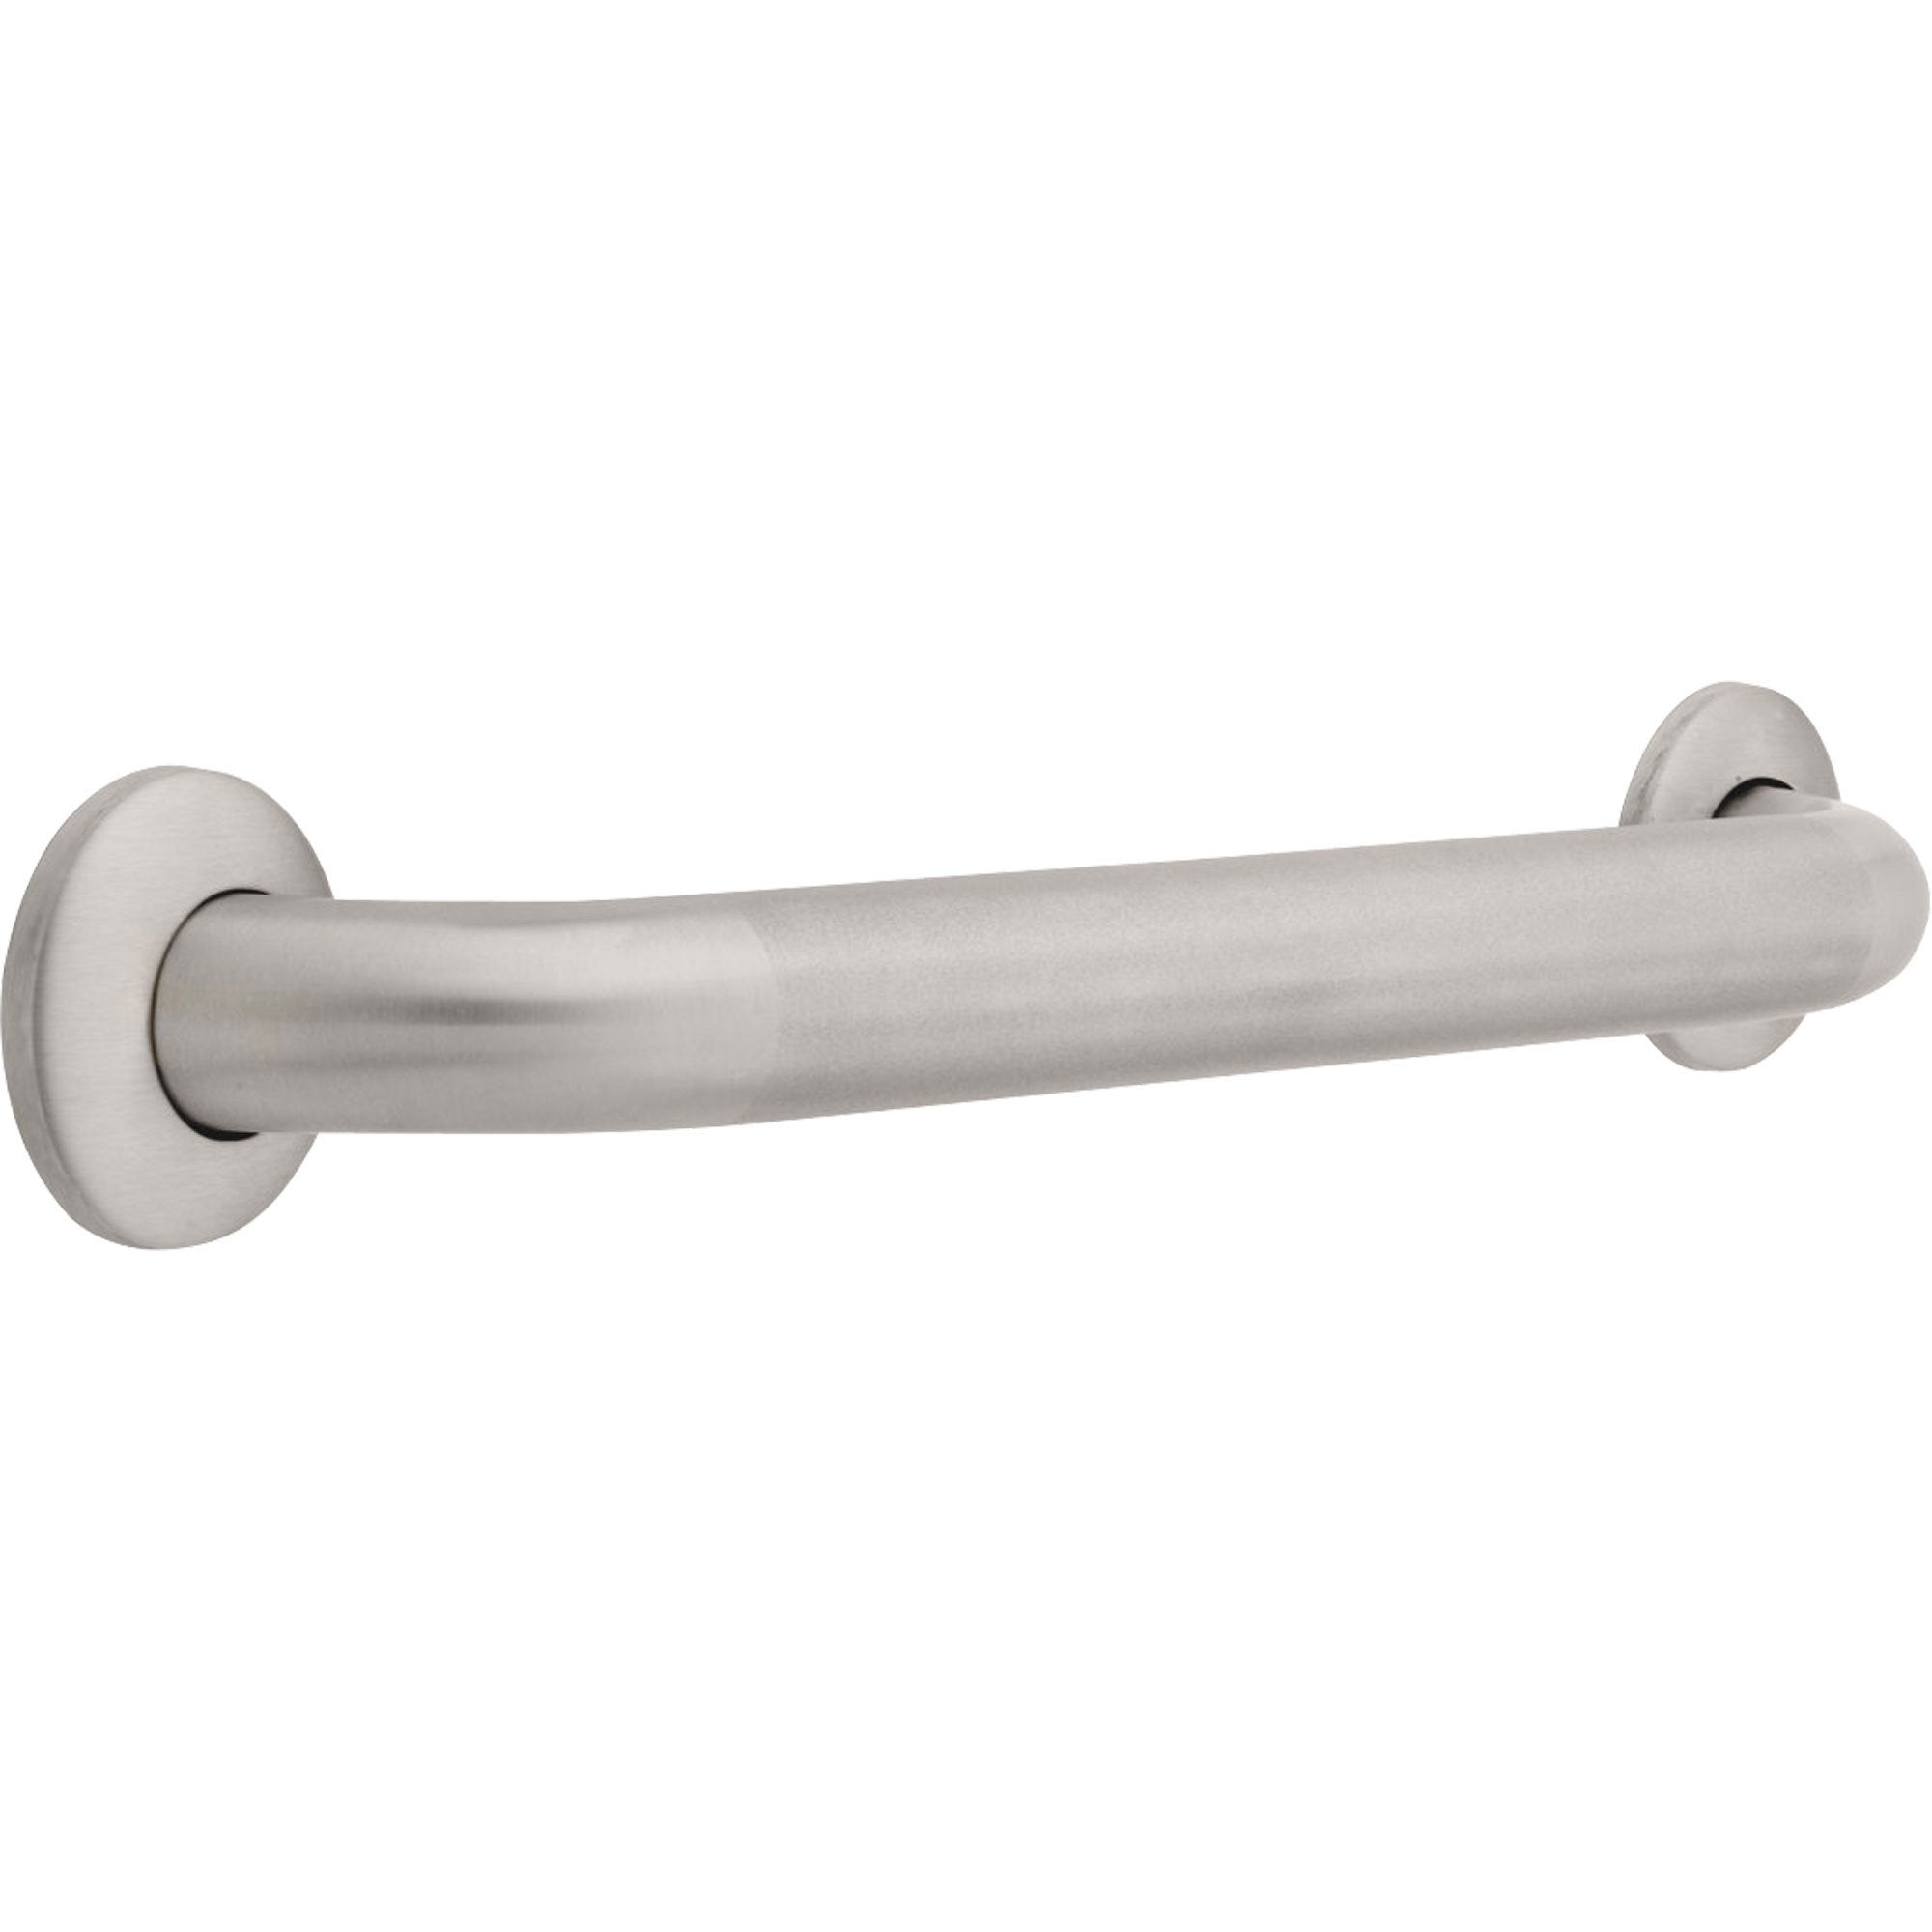 Delta ADA Complaint 1.5" x 18" Concealed Mounting Grab Bar in Stainless 572943